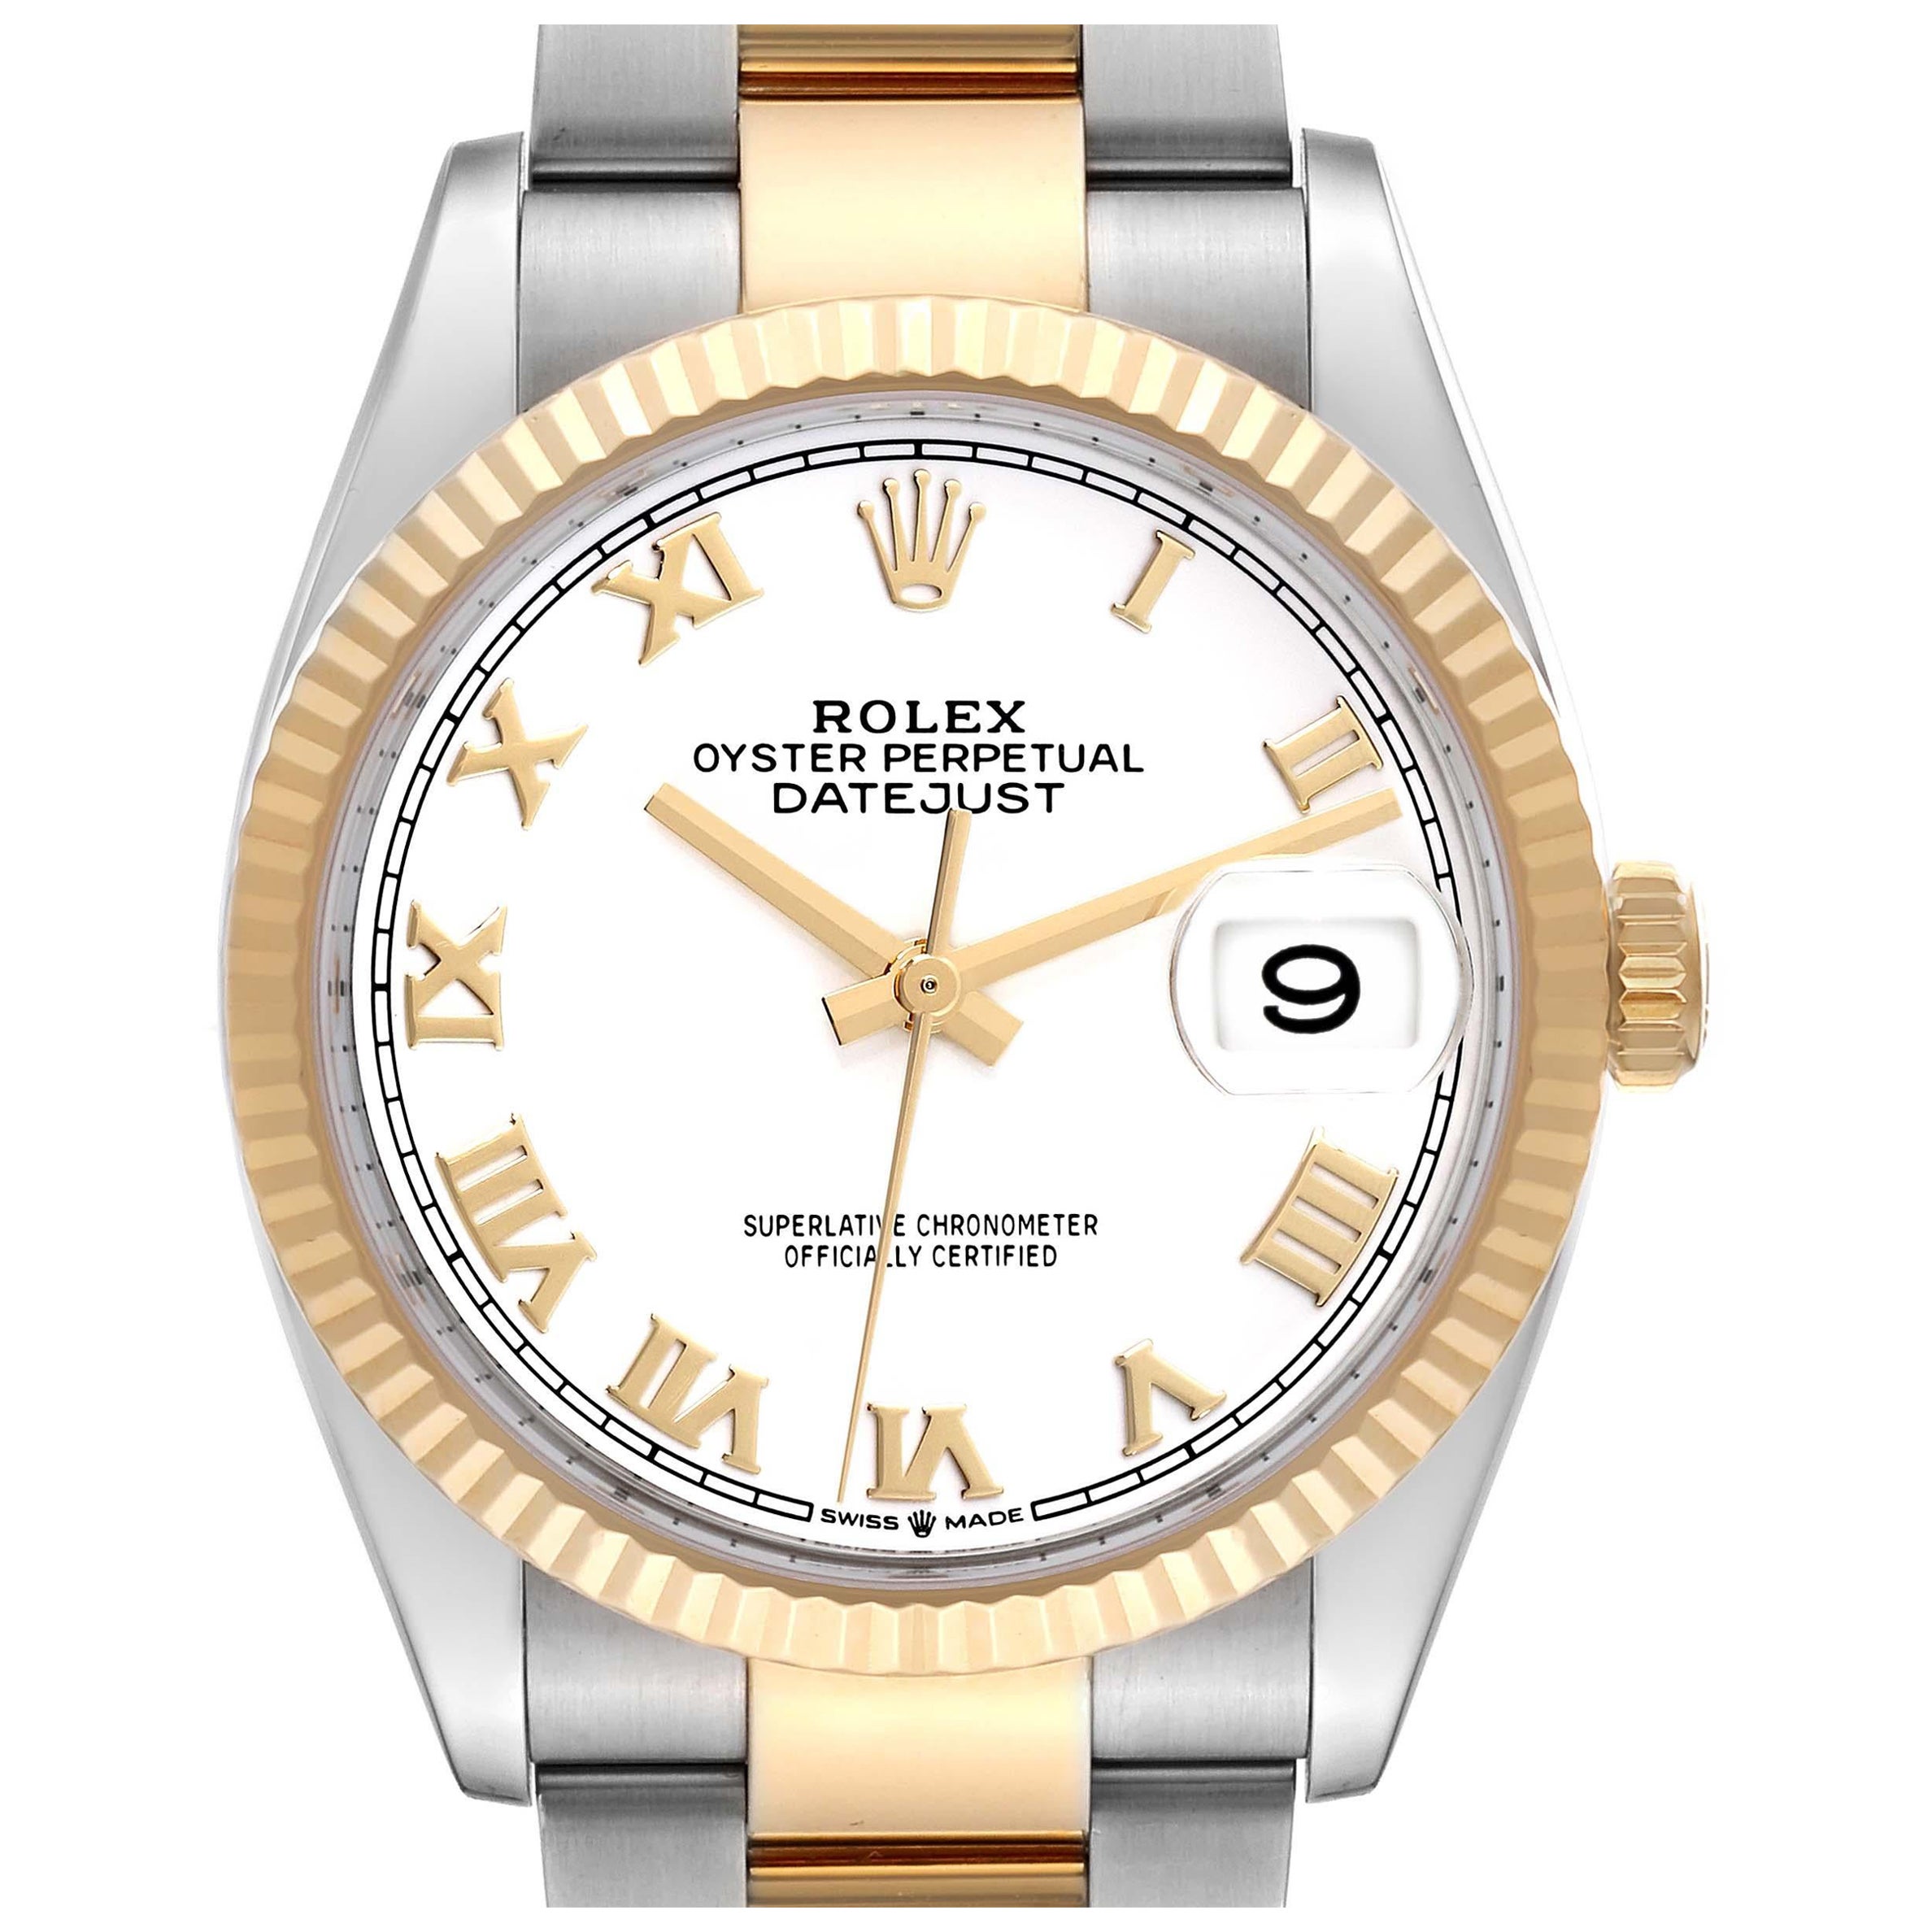 Rolex Datejust Steel Yellow Gold White Dial Mens Watch 126233 Box Card For Sale